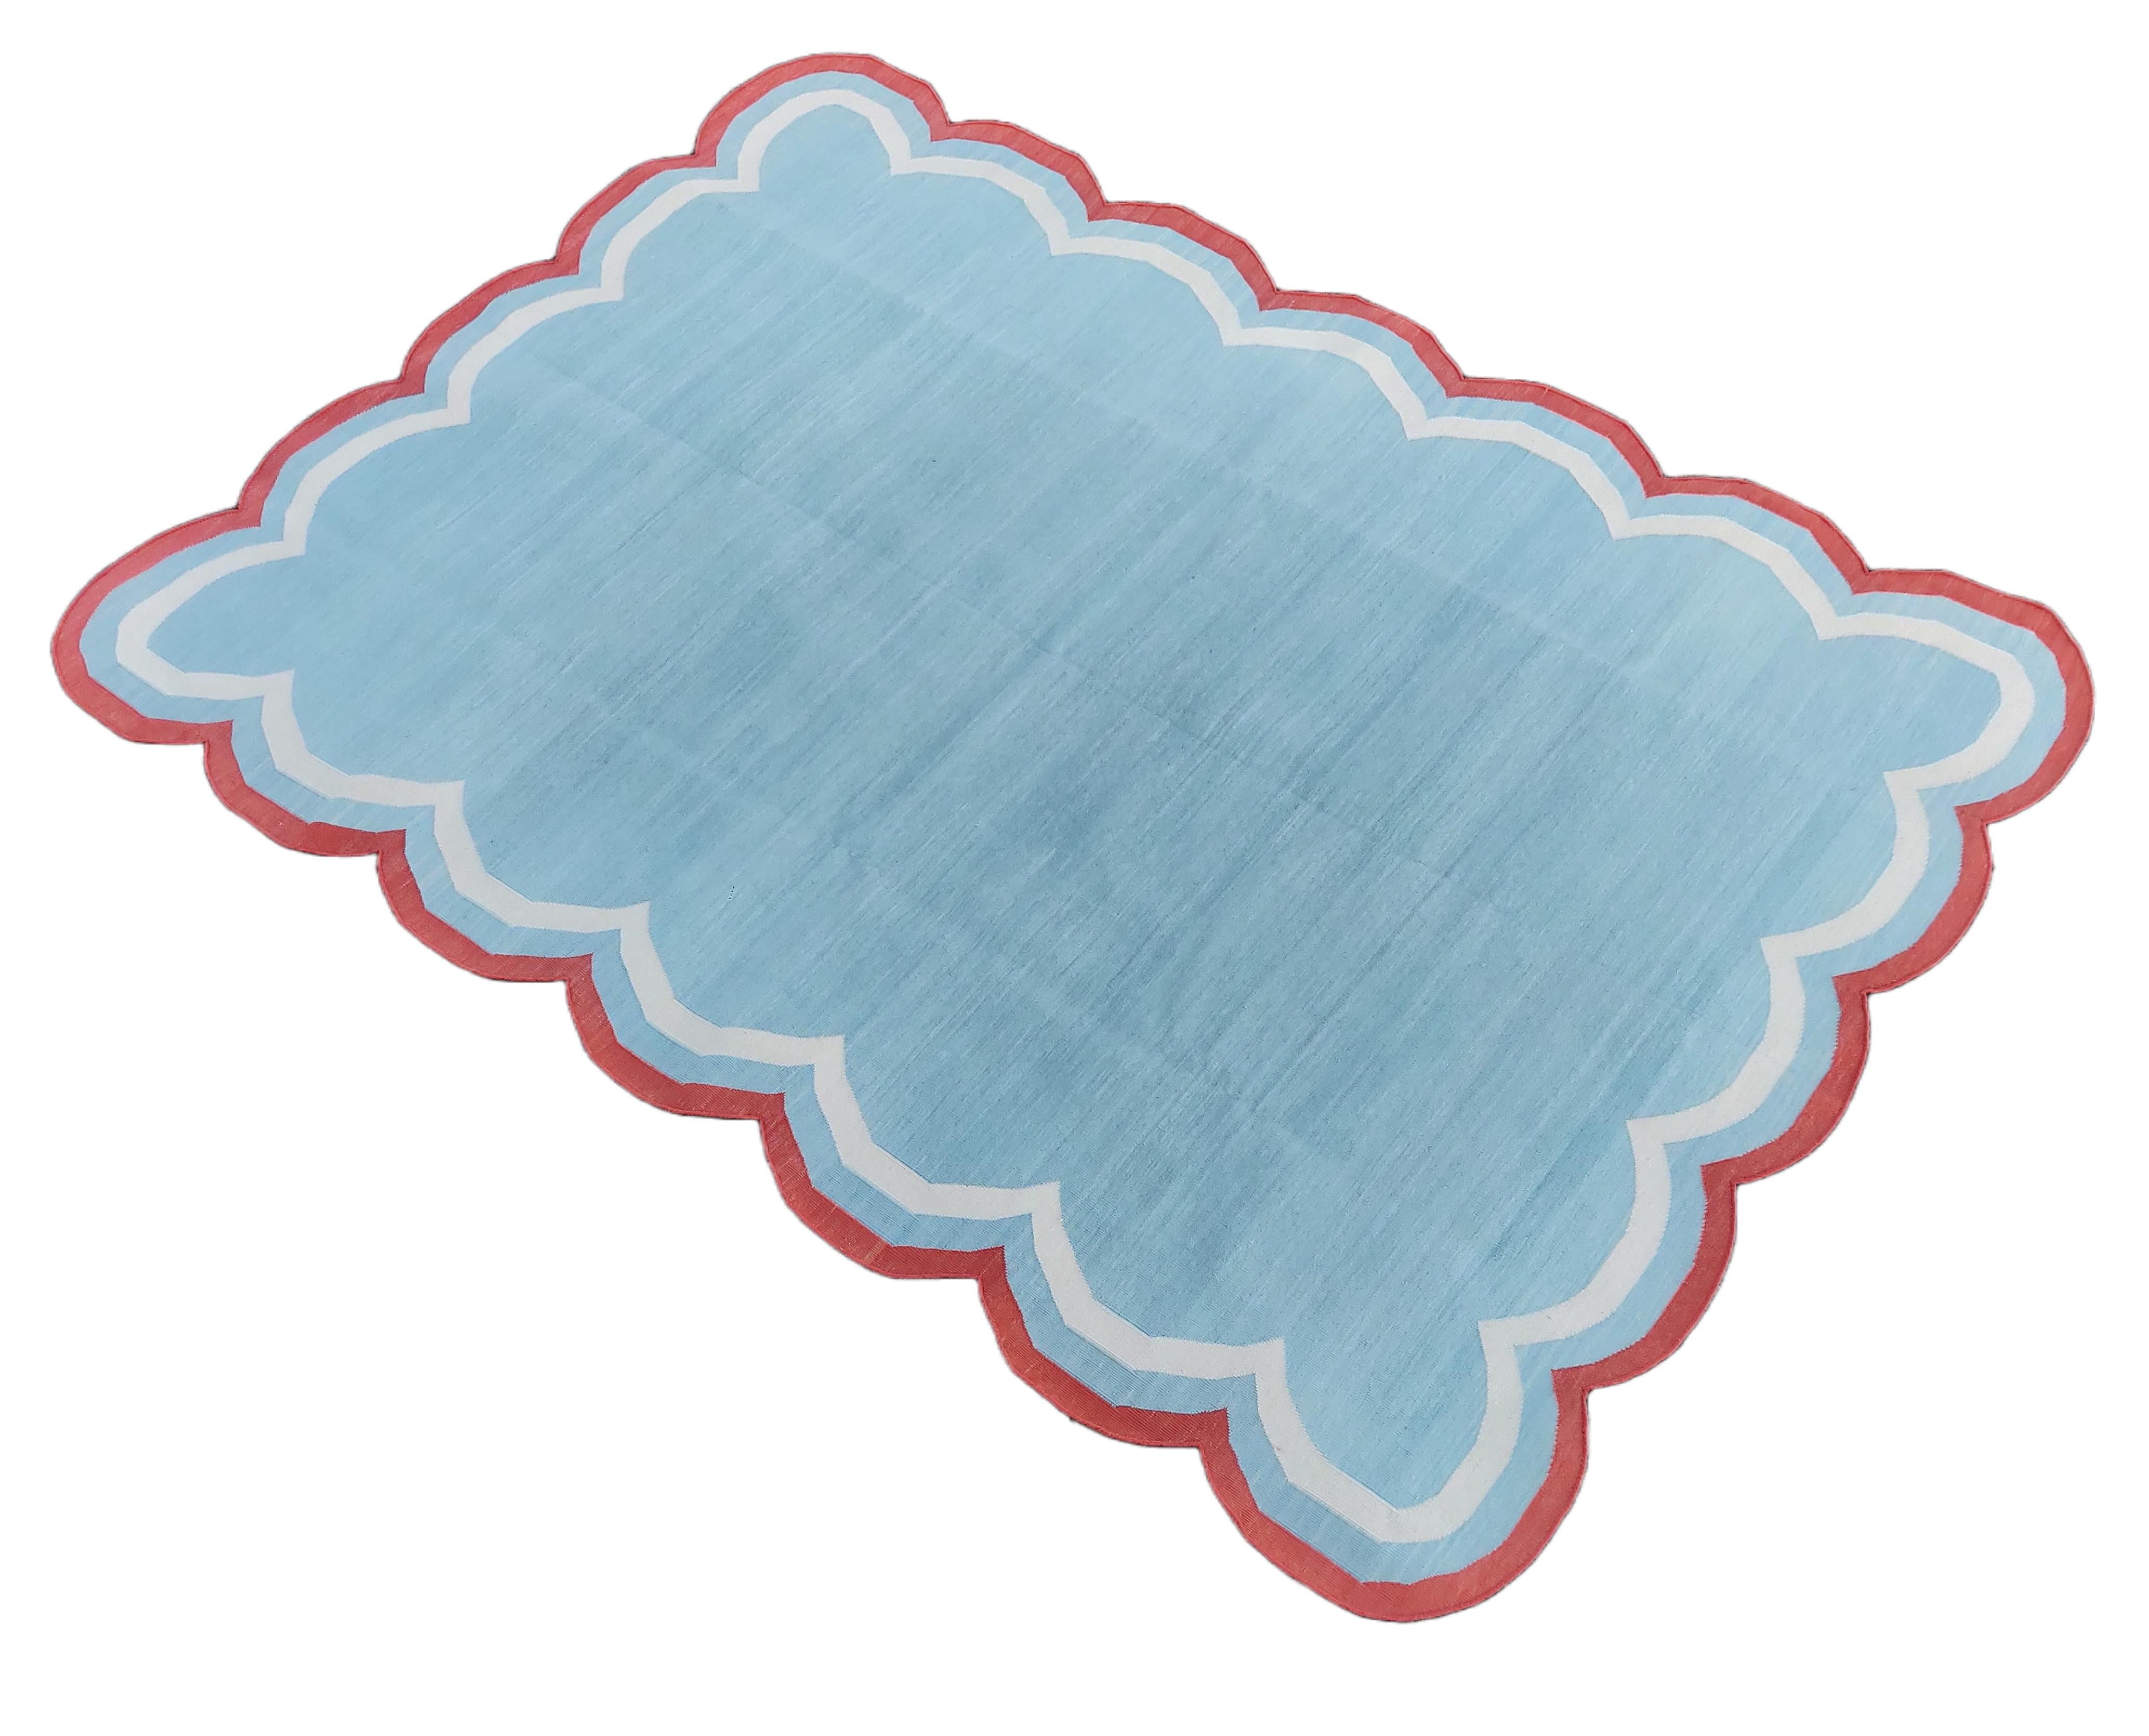 Cotton Vegetable Dyed Sky Blue, Cream And Terracotta Red Four Sided Scalloped Rug-5'x8' 
(Scallops runs on all Four Sides)
These special flat-weave dhurries are hand-woven with 15 ply 100% cotton yarn. Due to the special manufacturing techniques